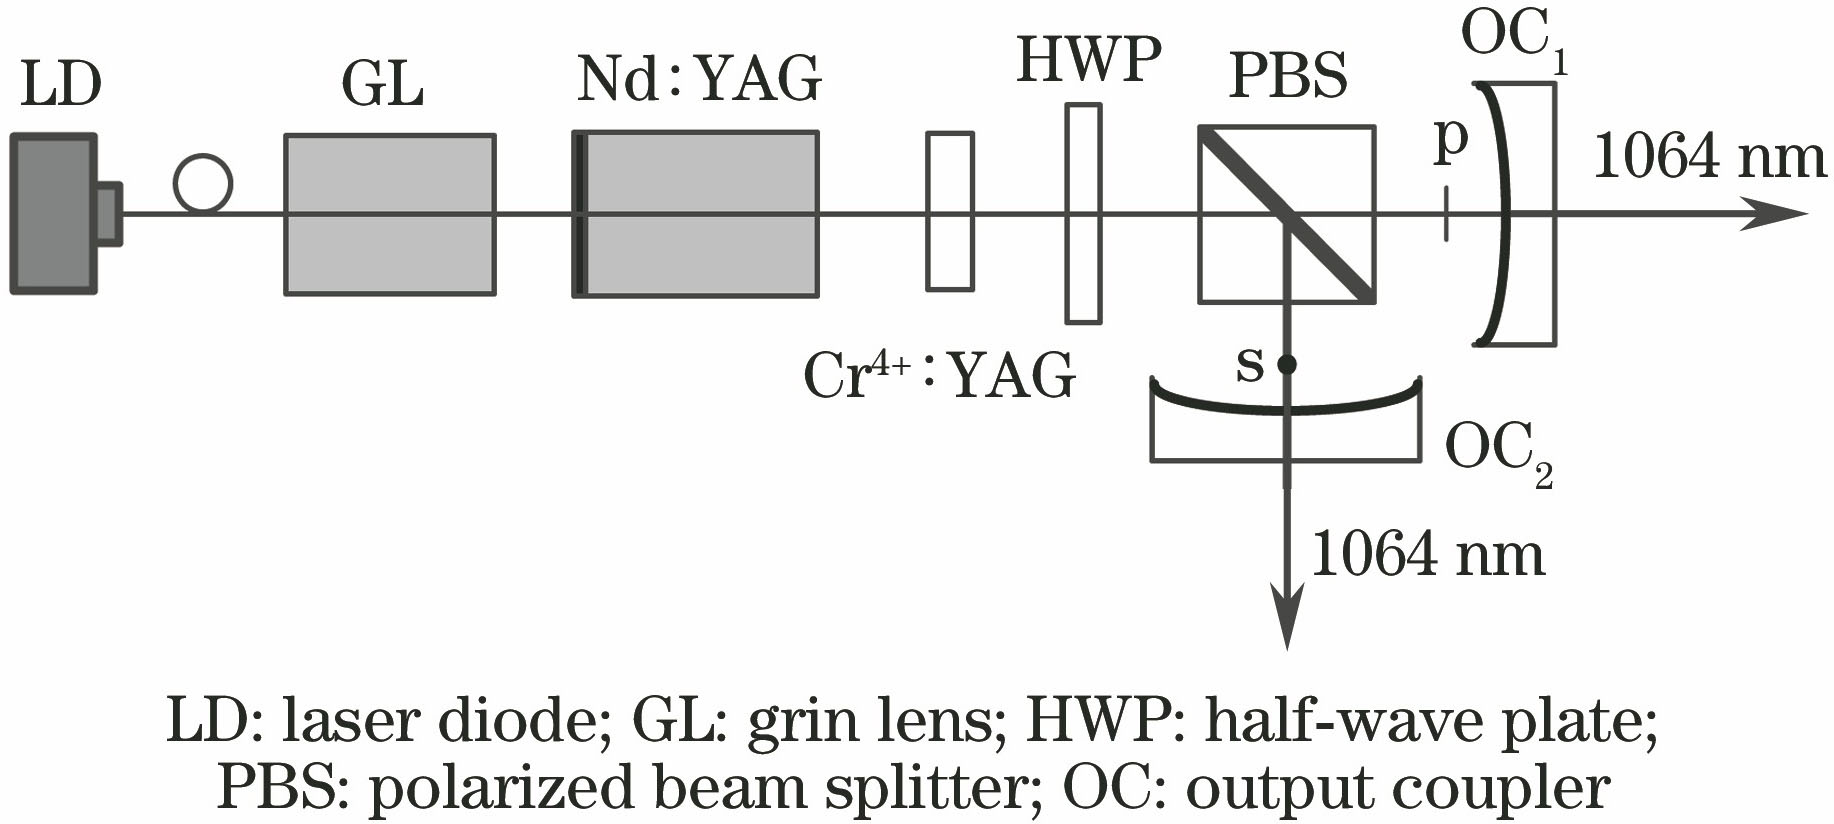 Passively Q-switched two-cavity dual-frequency Nd∶YAG laser